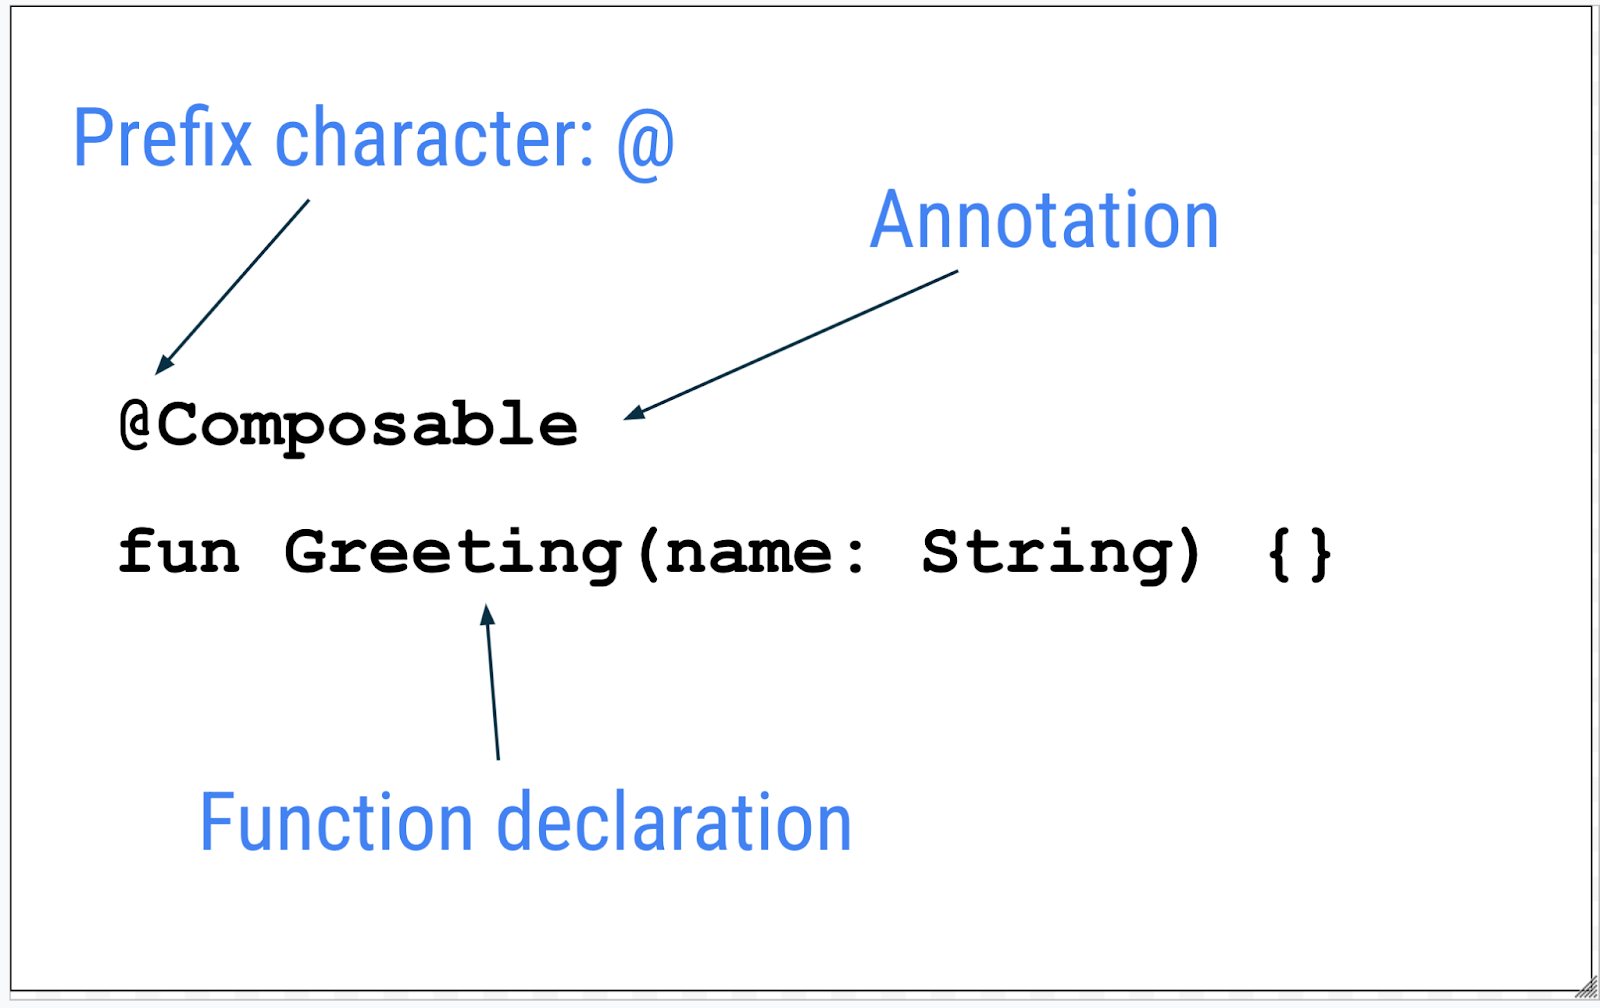 prefix character is @ annotation is composable followed by the function declaration 